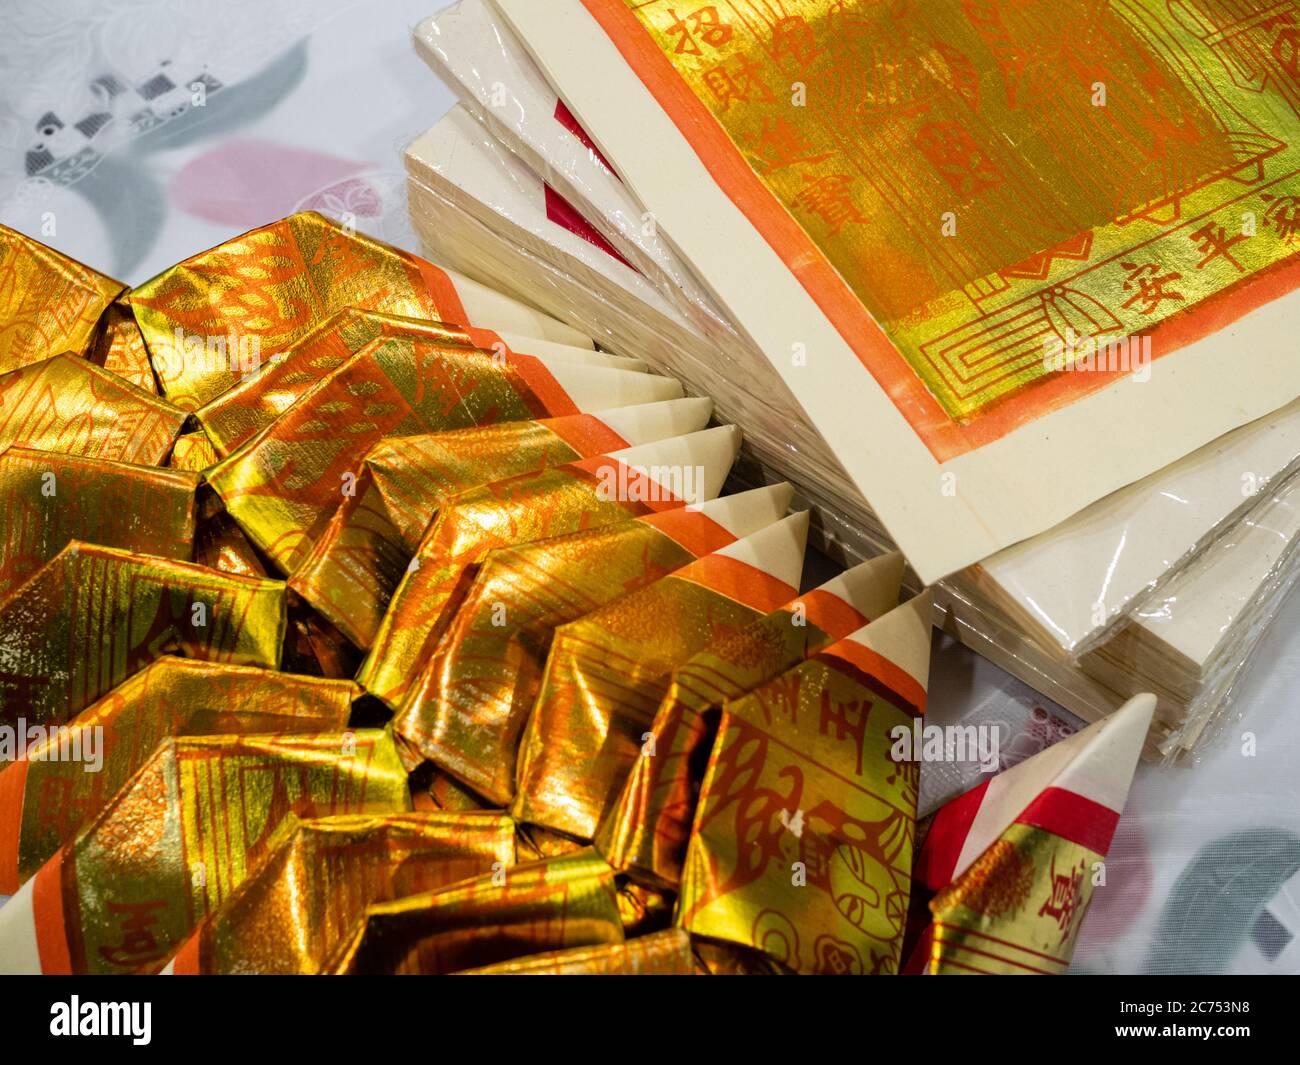 Gold Chinese joss paper aka ghost money, spirit money or hell bank notes folded into the shape of a Chinese gold ingot for ancestral worship or prayer Stock Photo